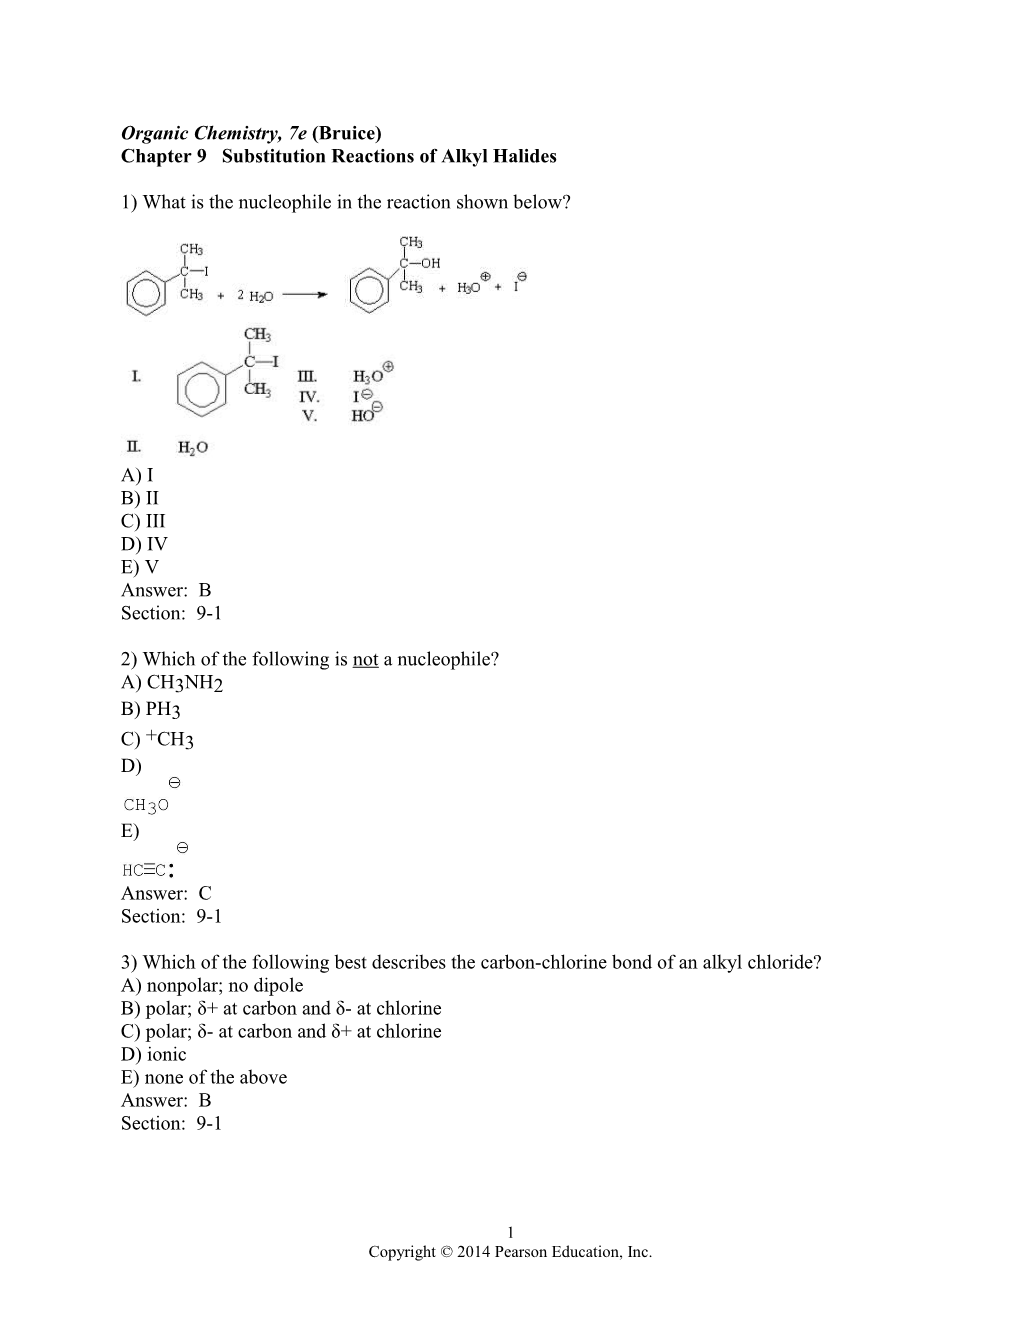 Chapter 9 Substitution Reactions of Alkyl Halides